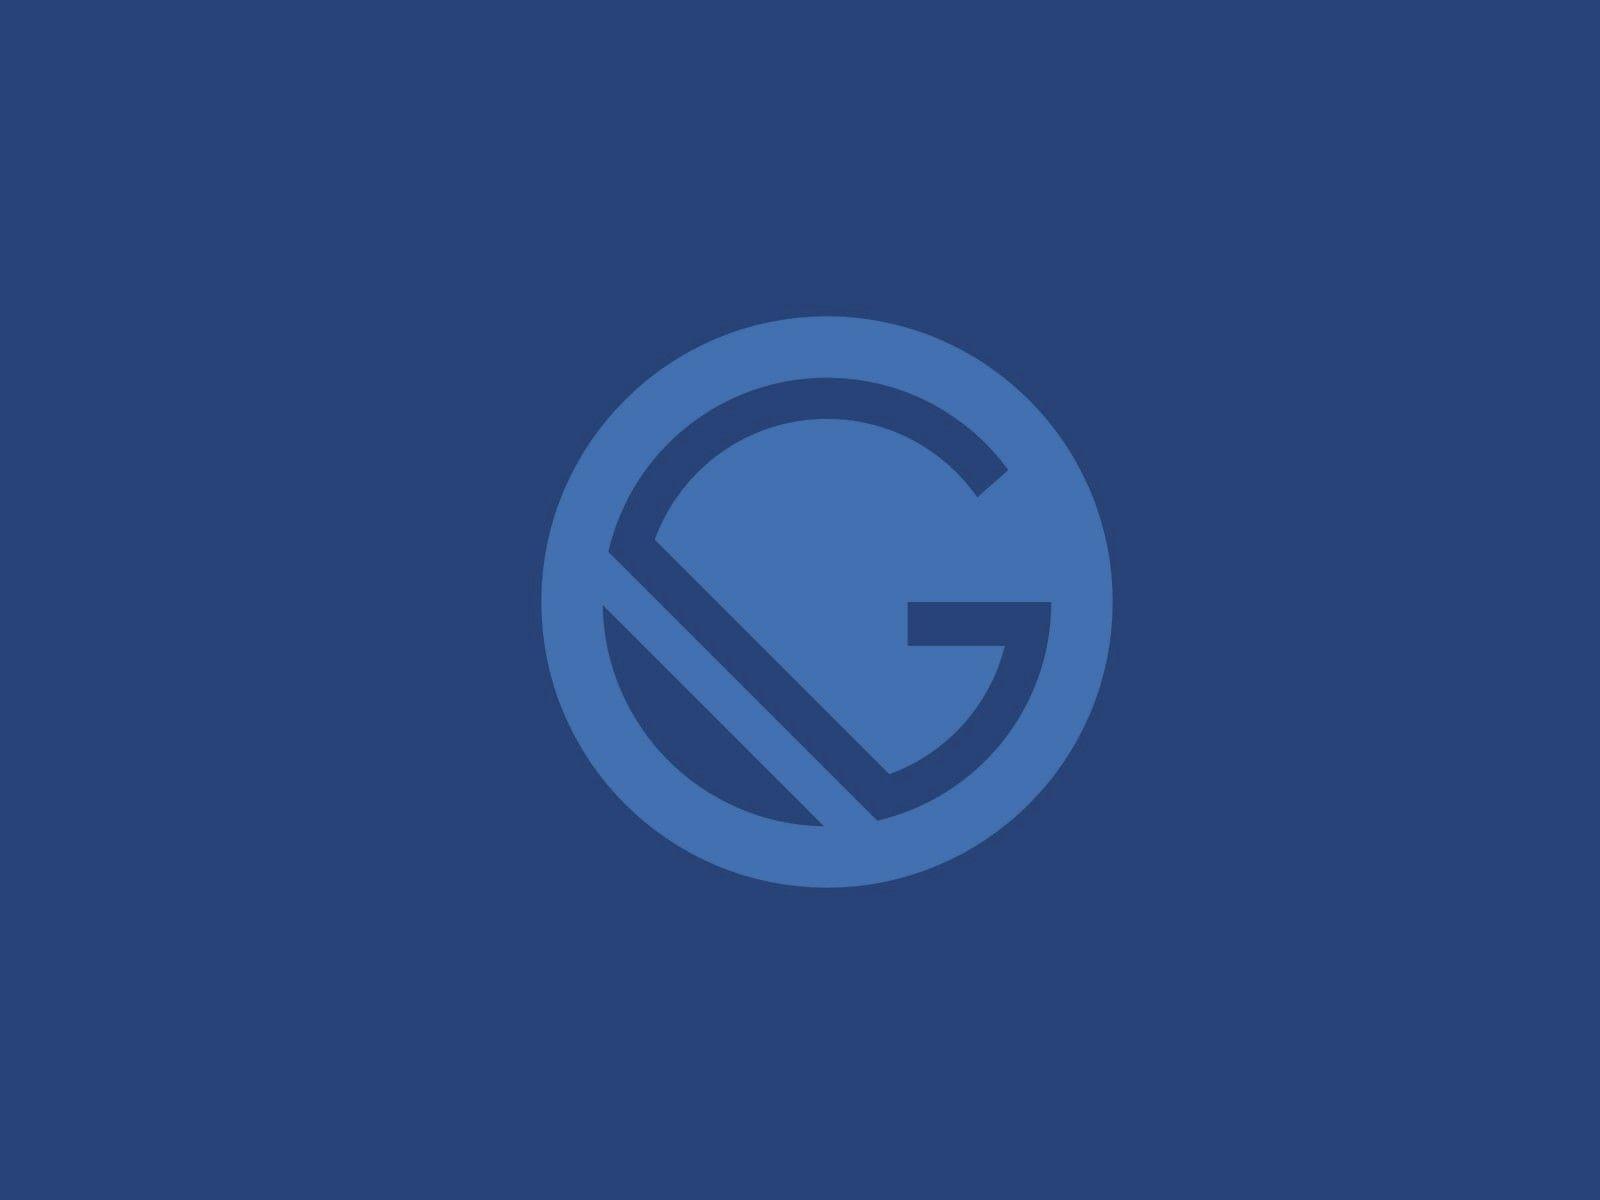 Gatsby Logo - Guide to Building a Gatsby Site From the Ground Up. JustinFormentin